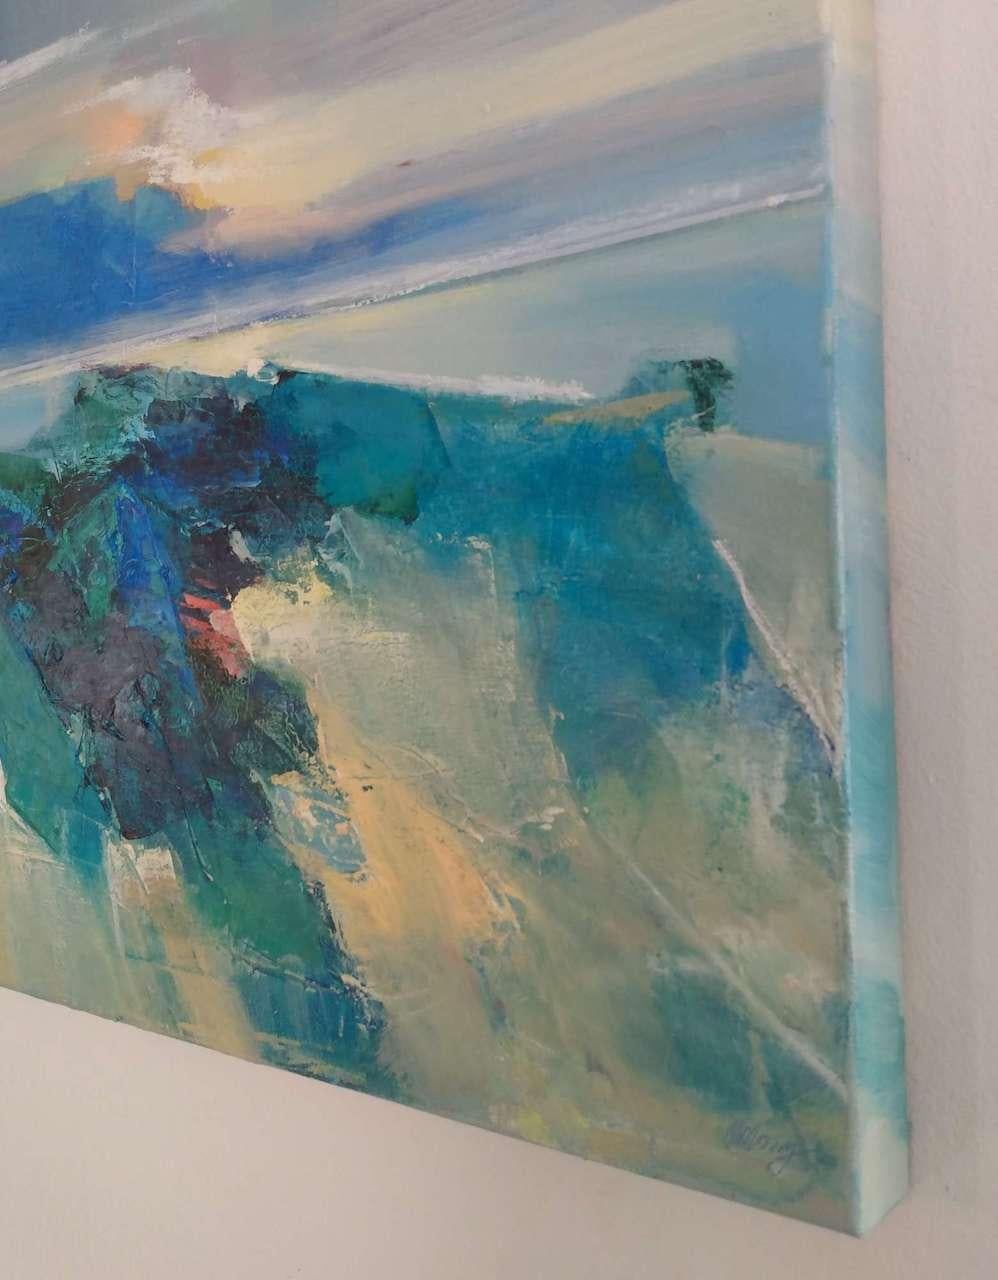 Magdalena Morey
Ocean Light 1
Original Cubist Inspired Landscape Painting
Mixed Media on Canvas
Canvas Size: H 50cm x W 50cm x D 4cm
Sold Unframed
(Please note that in situ images are purely an indication of how a piece may look.)

Ocean Light 1 is